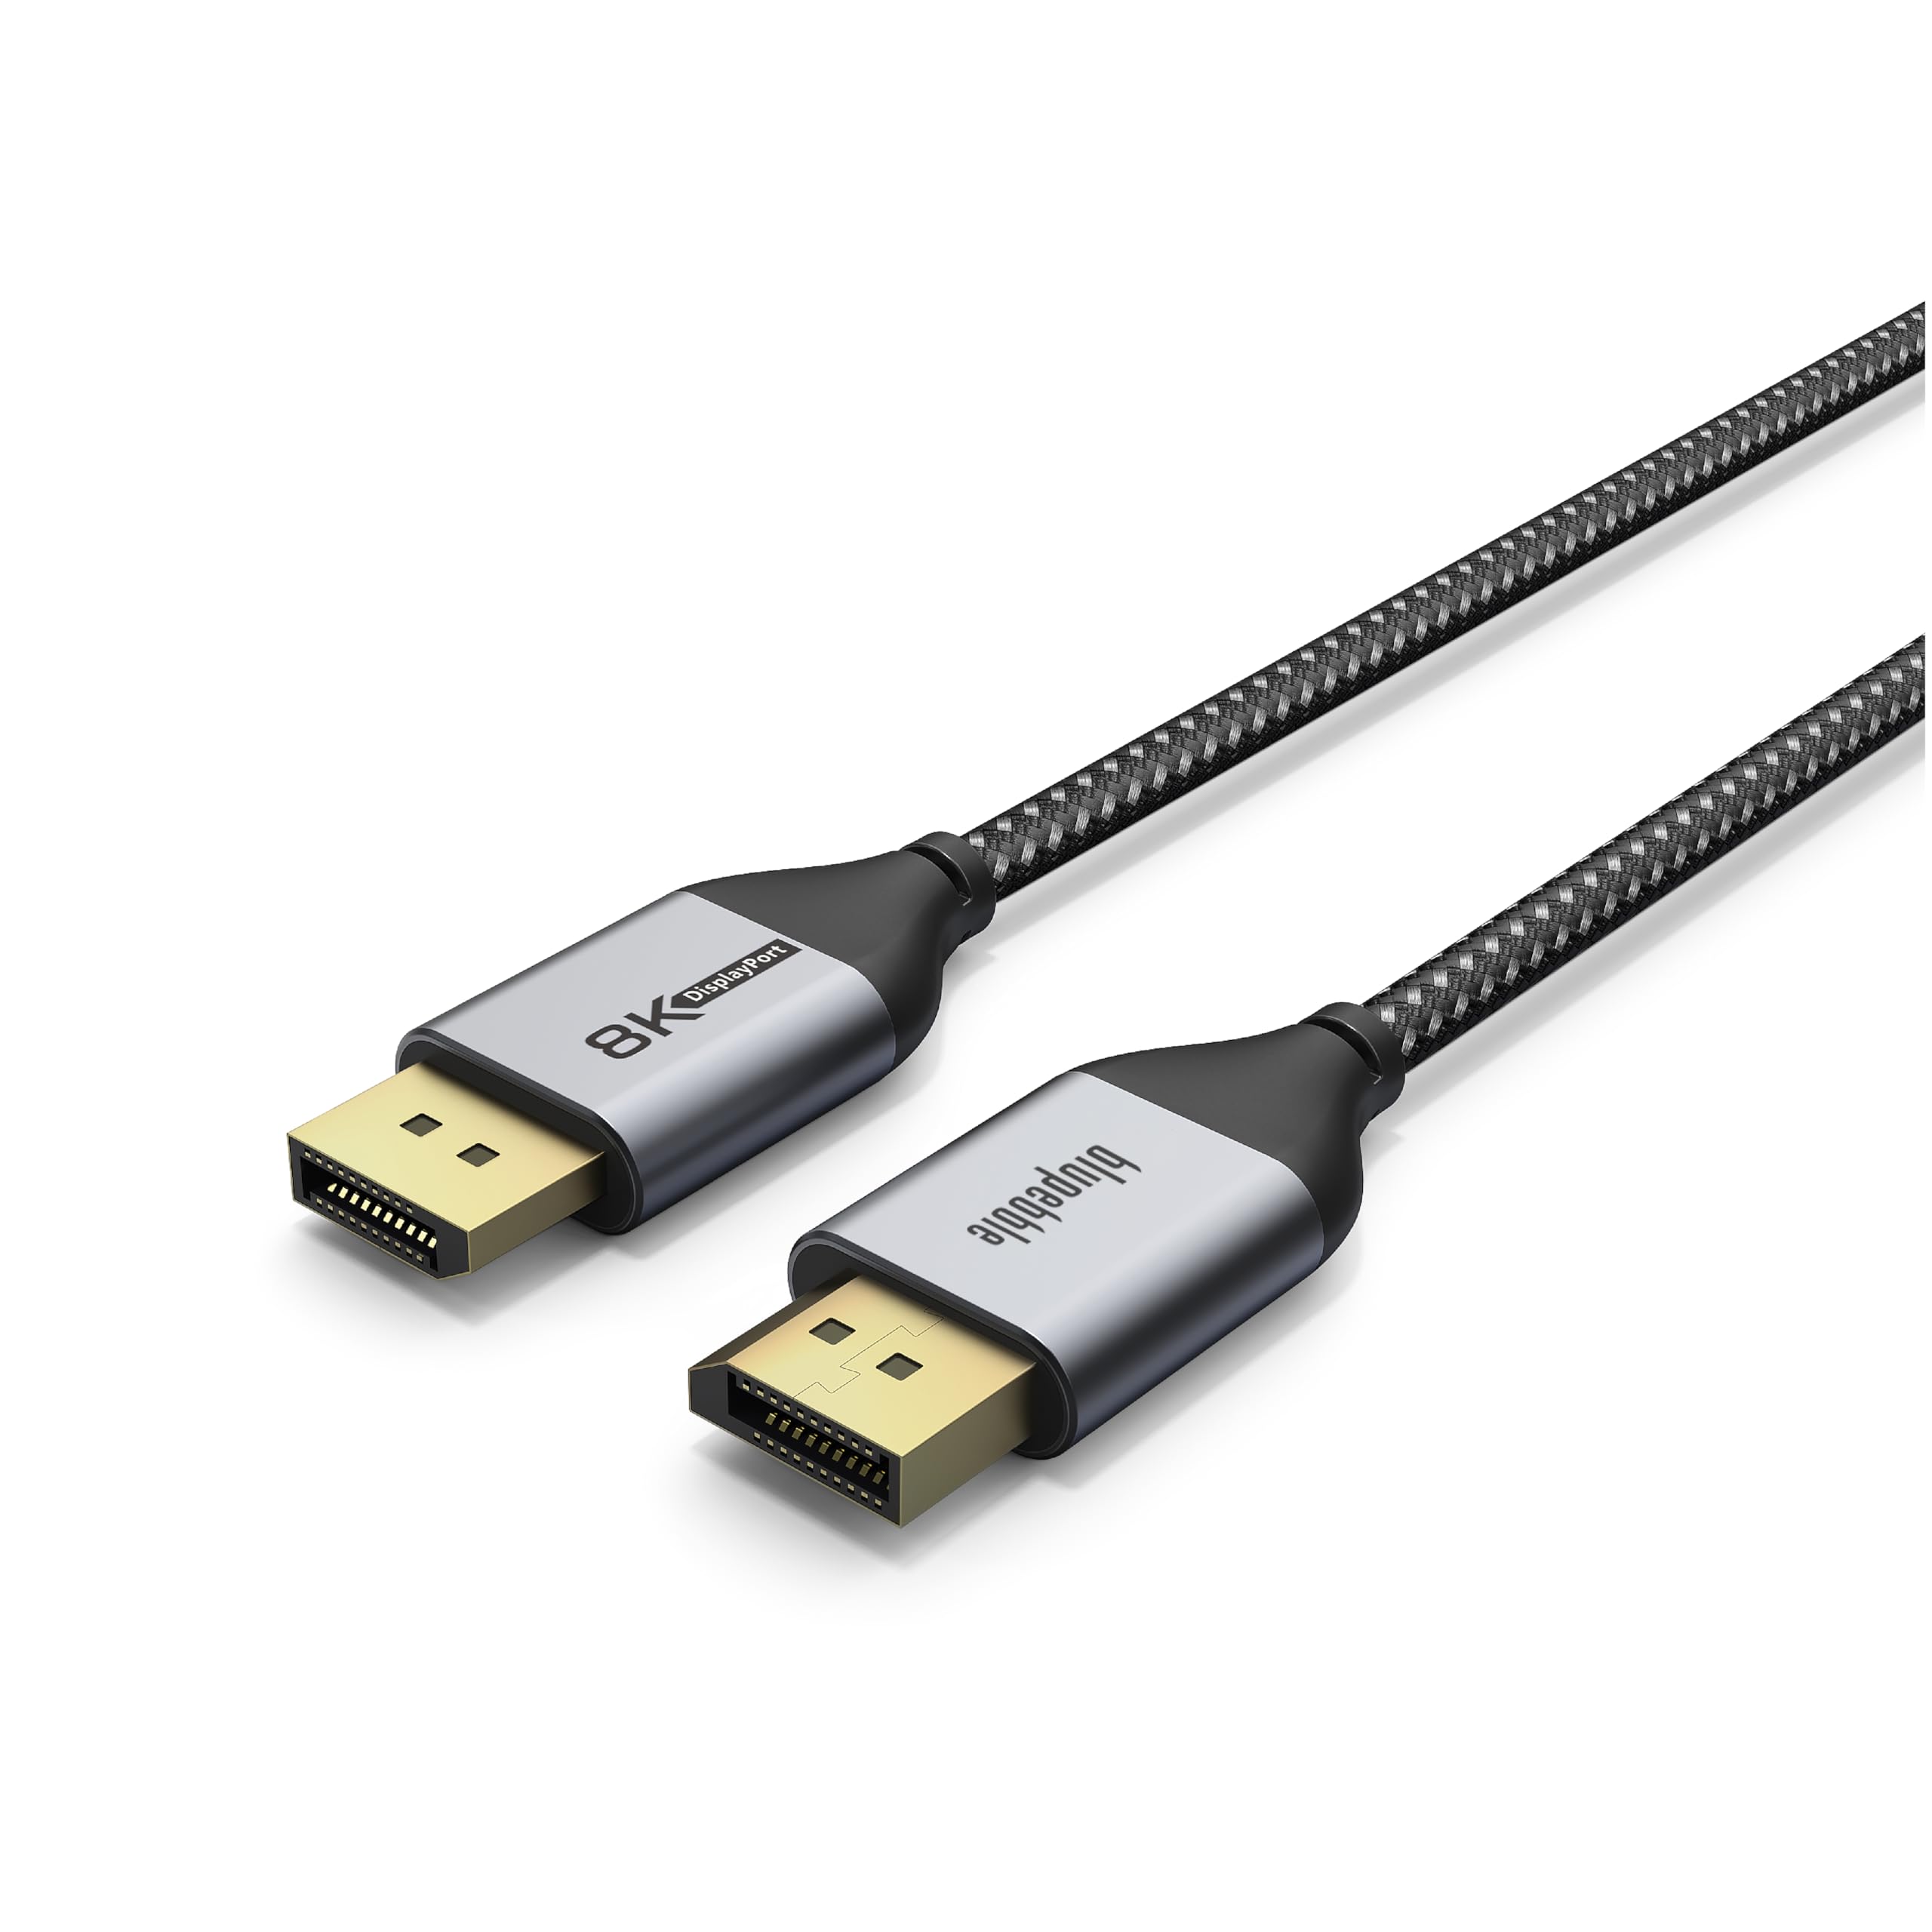 Blupebble 8K DisplayPort Cable 1.4 8K@60Hz/4K@144Hz/2K@240Hz/1080P@240Hz, for Gaming Monitor/Graphics Card/PC, Support 3D/HDCP/HDR/G-SYNC/Free-SYNC, Male to Male Nylon Braided Cable (1 Metre)